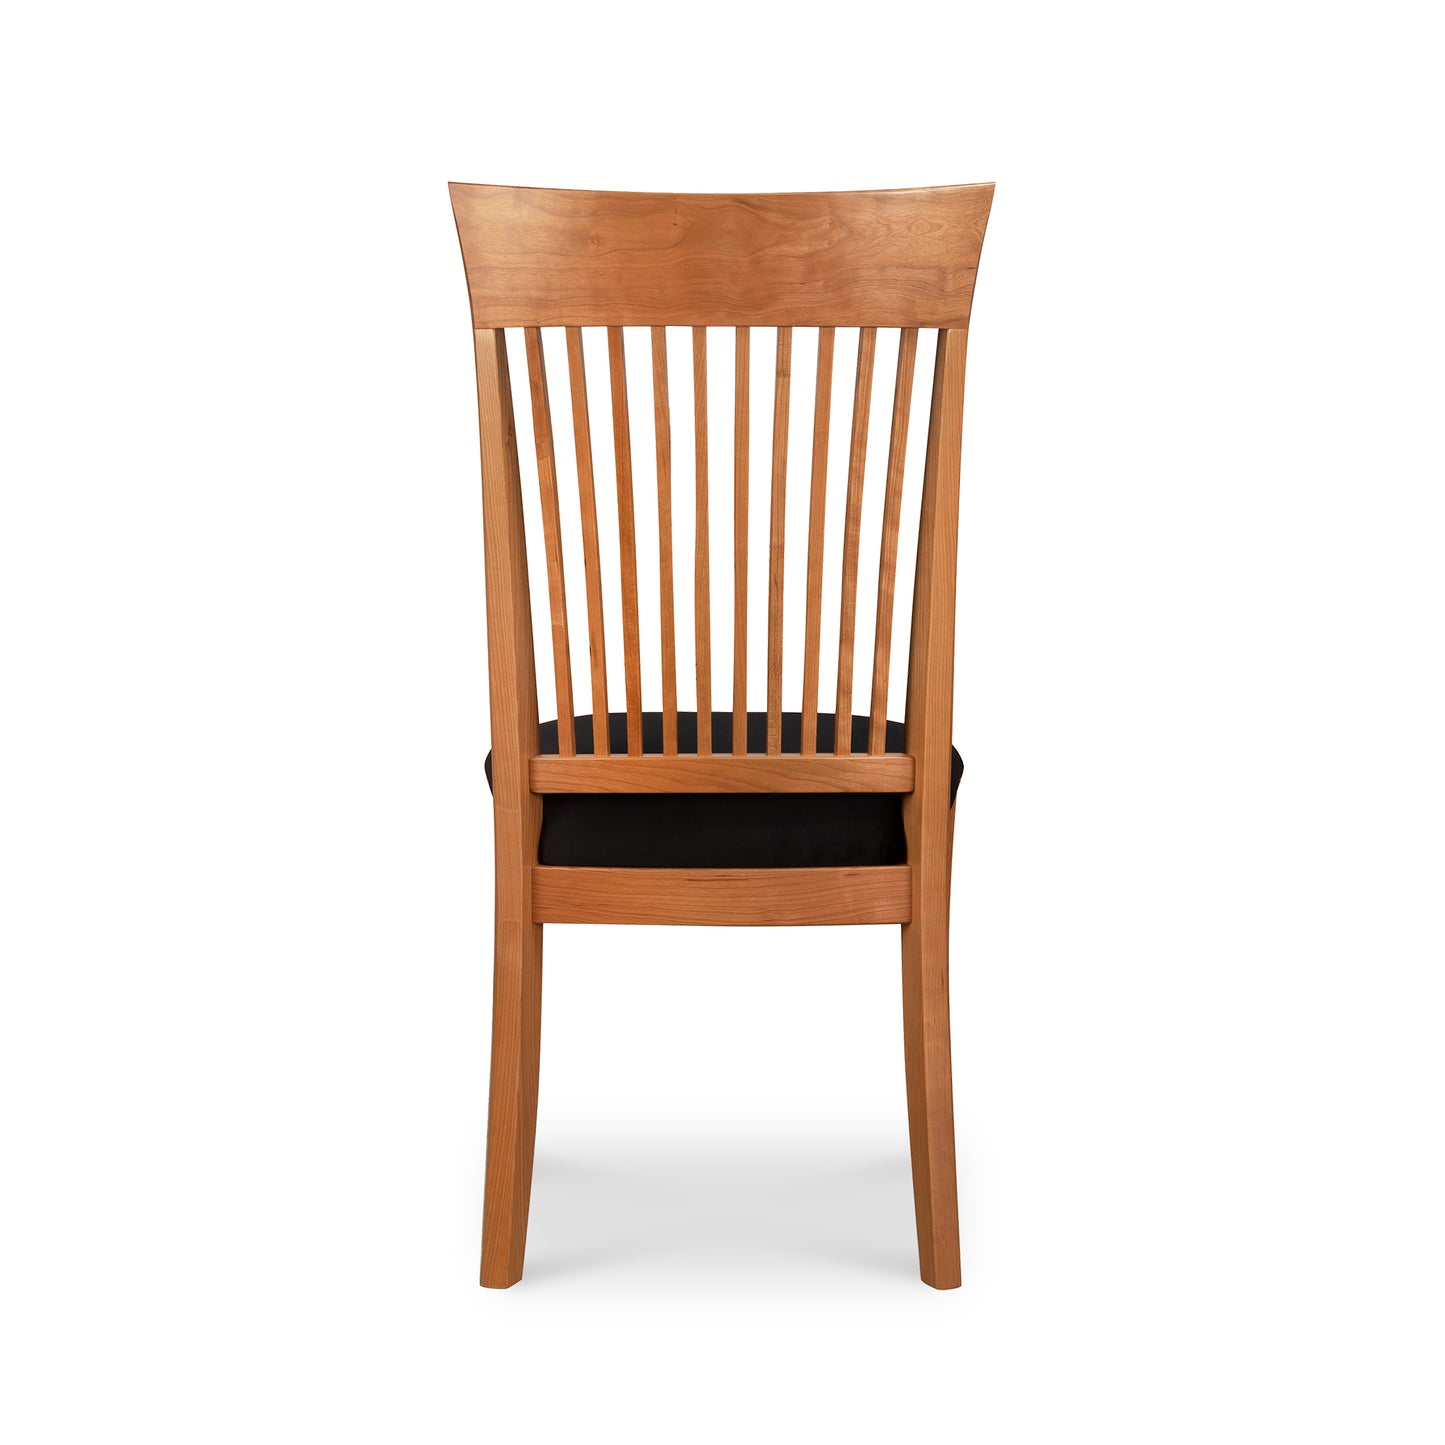 A Vermont Woods Studios contemporary Shaker chair with a tall, slatted back and a dark seat cushion, isolated on a white background.